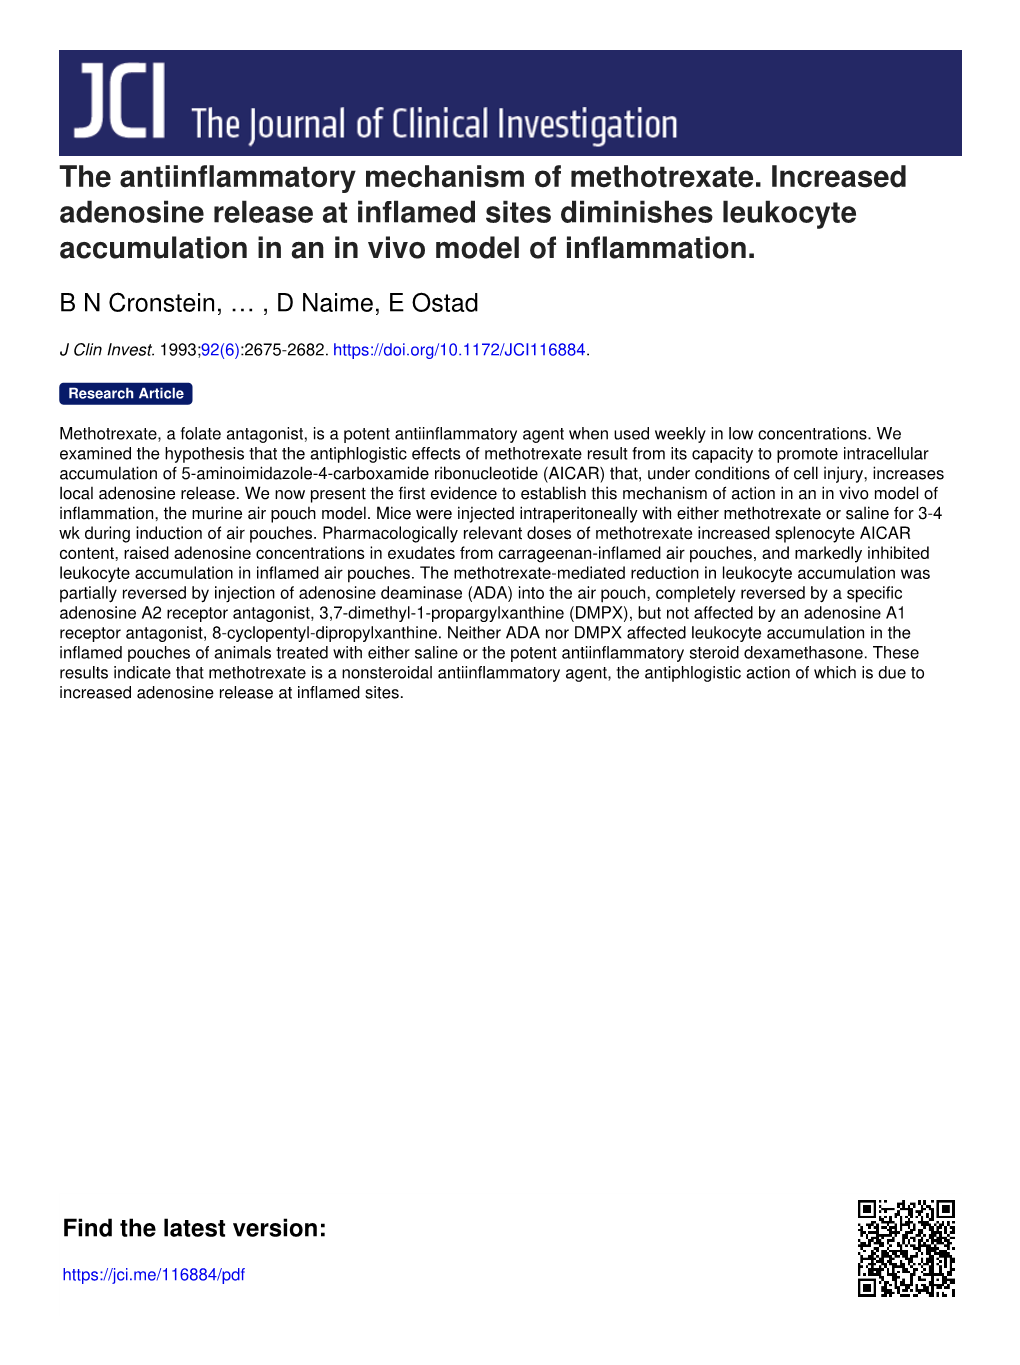 The Antiinflammatory Mechanism of Methotrexate. Increased Adenosine Release at Inflamed Sites Diminishes Leukocyte Accumulation in an in Vivo Model of Inflammation